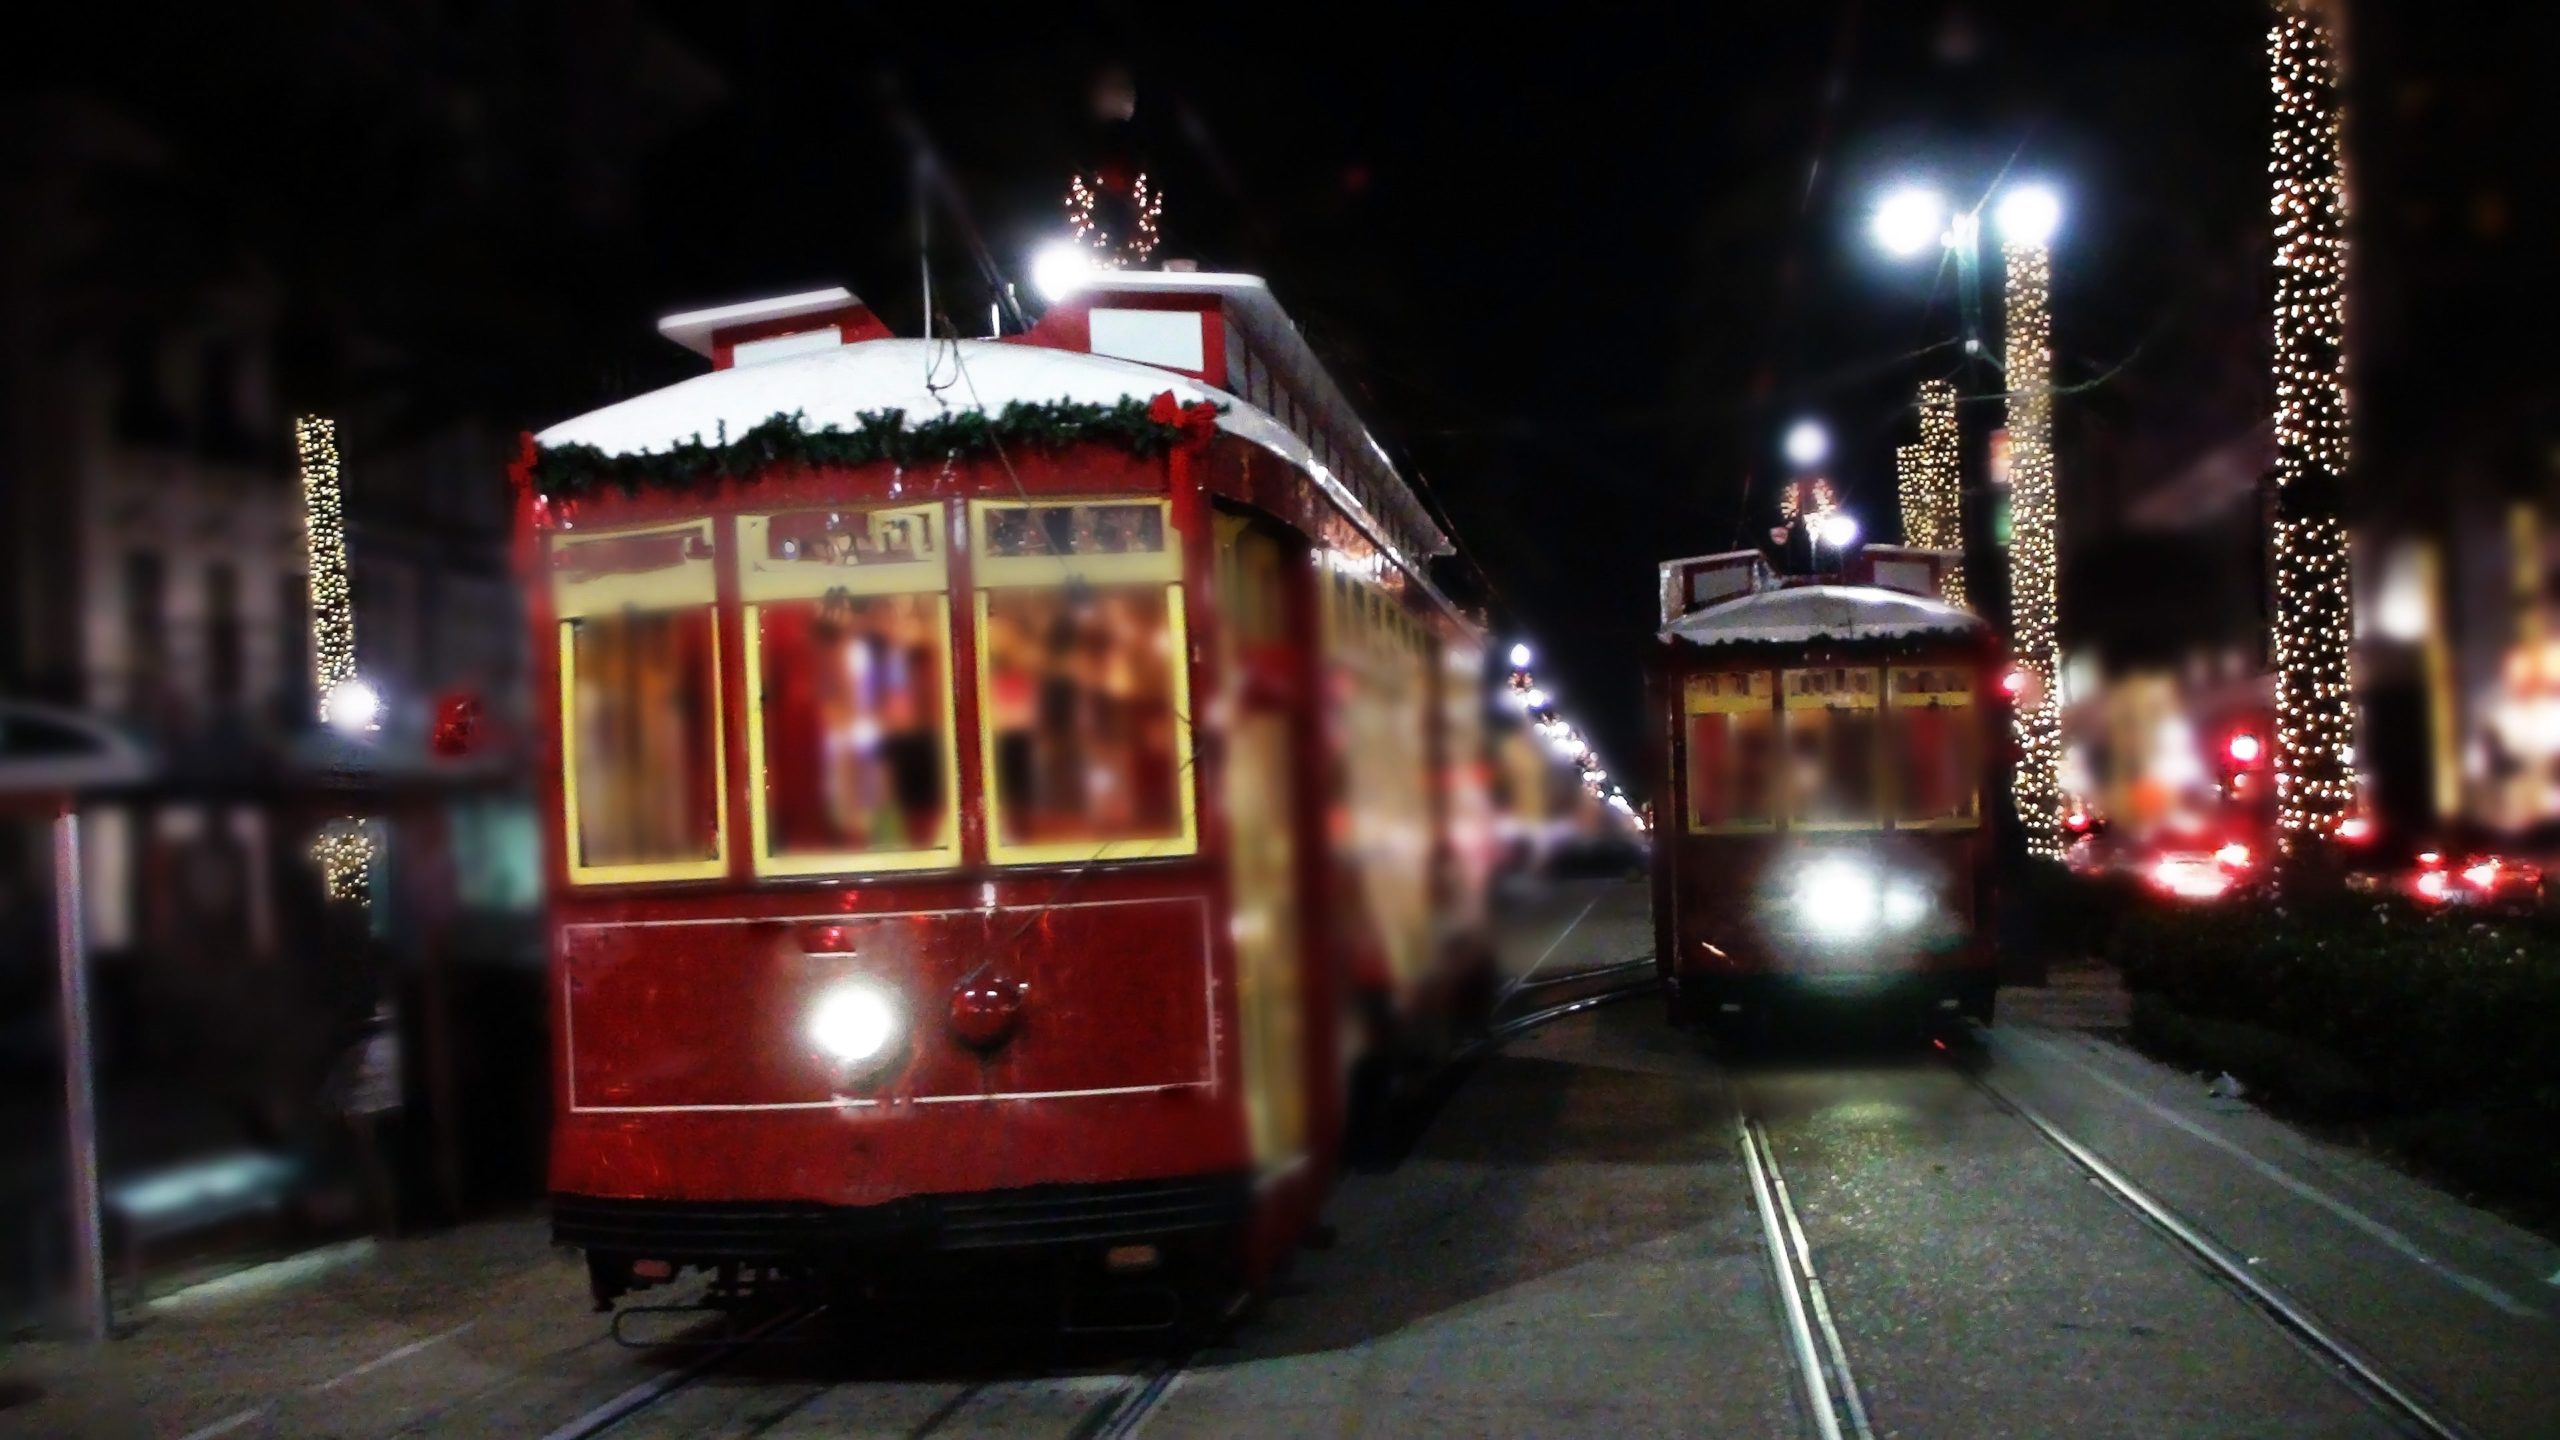 New Orleans Cable Car With Christmas Decorations in The Night,Photographed in The Month Of December 2014 in Louisiana,United States Of America.